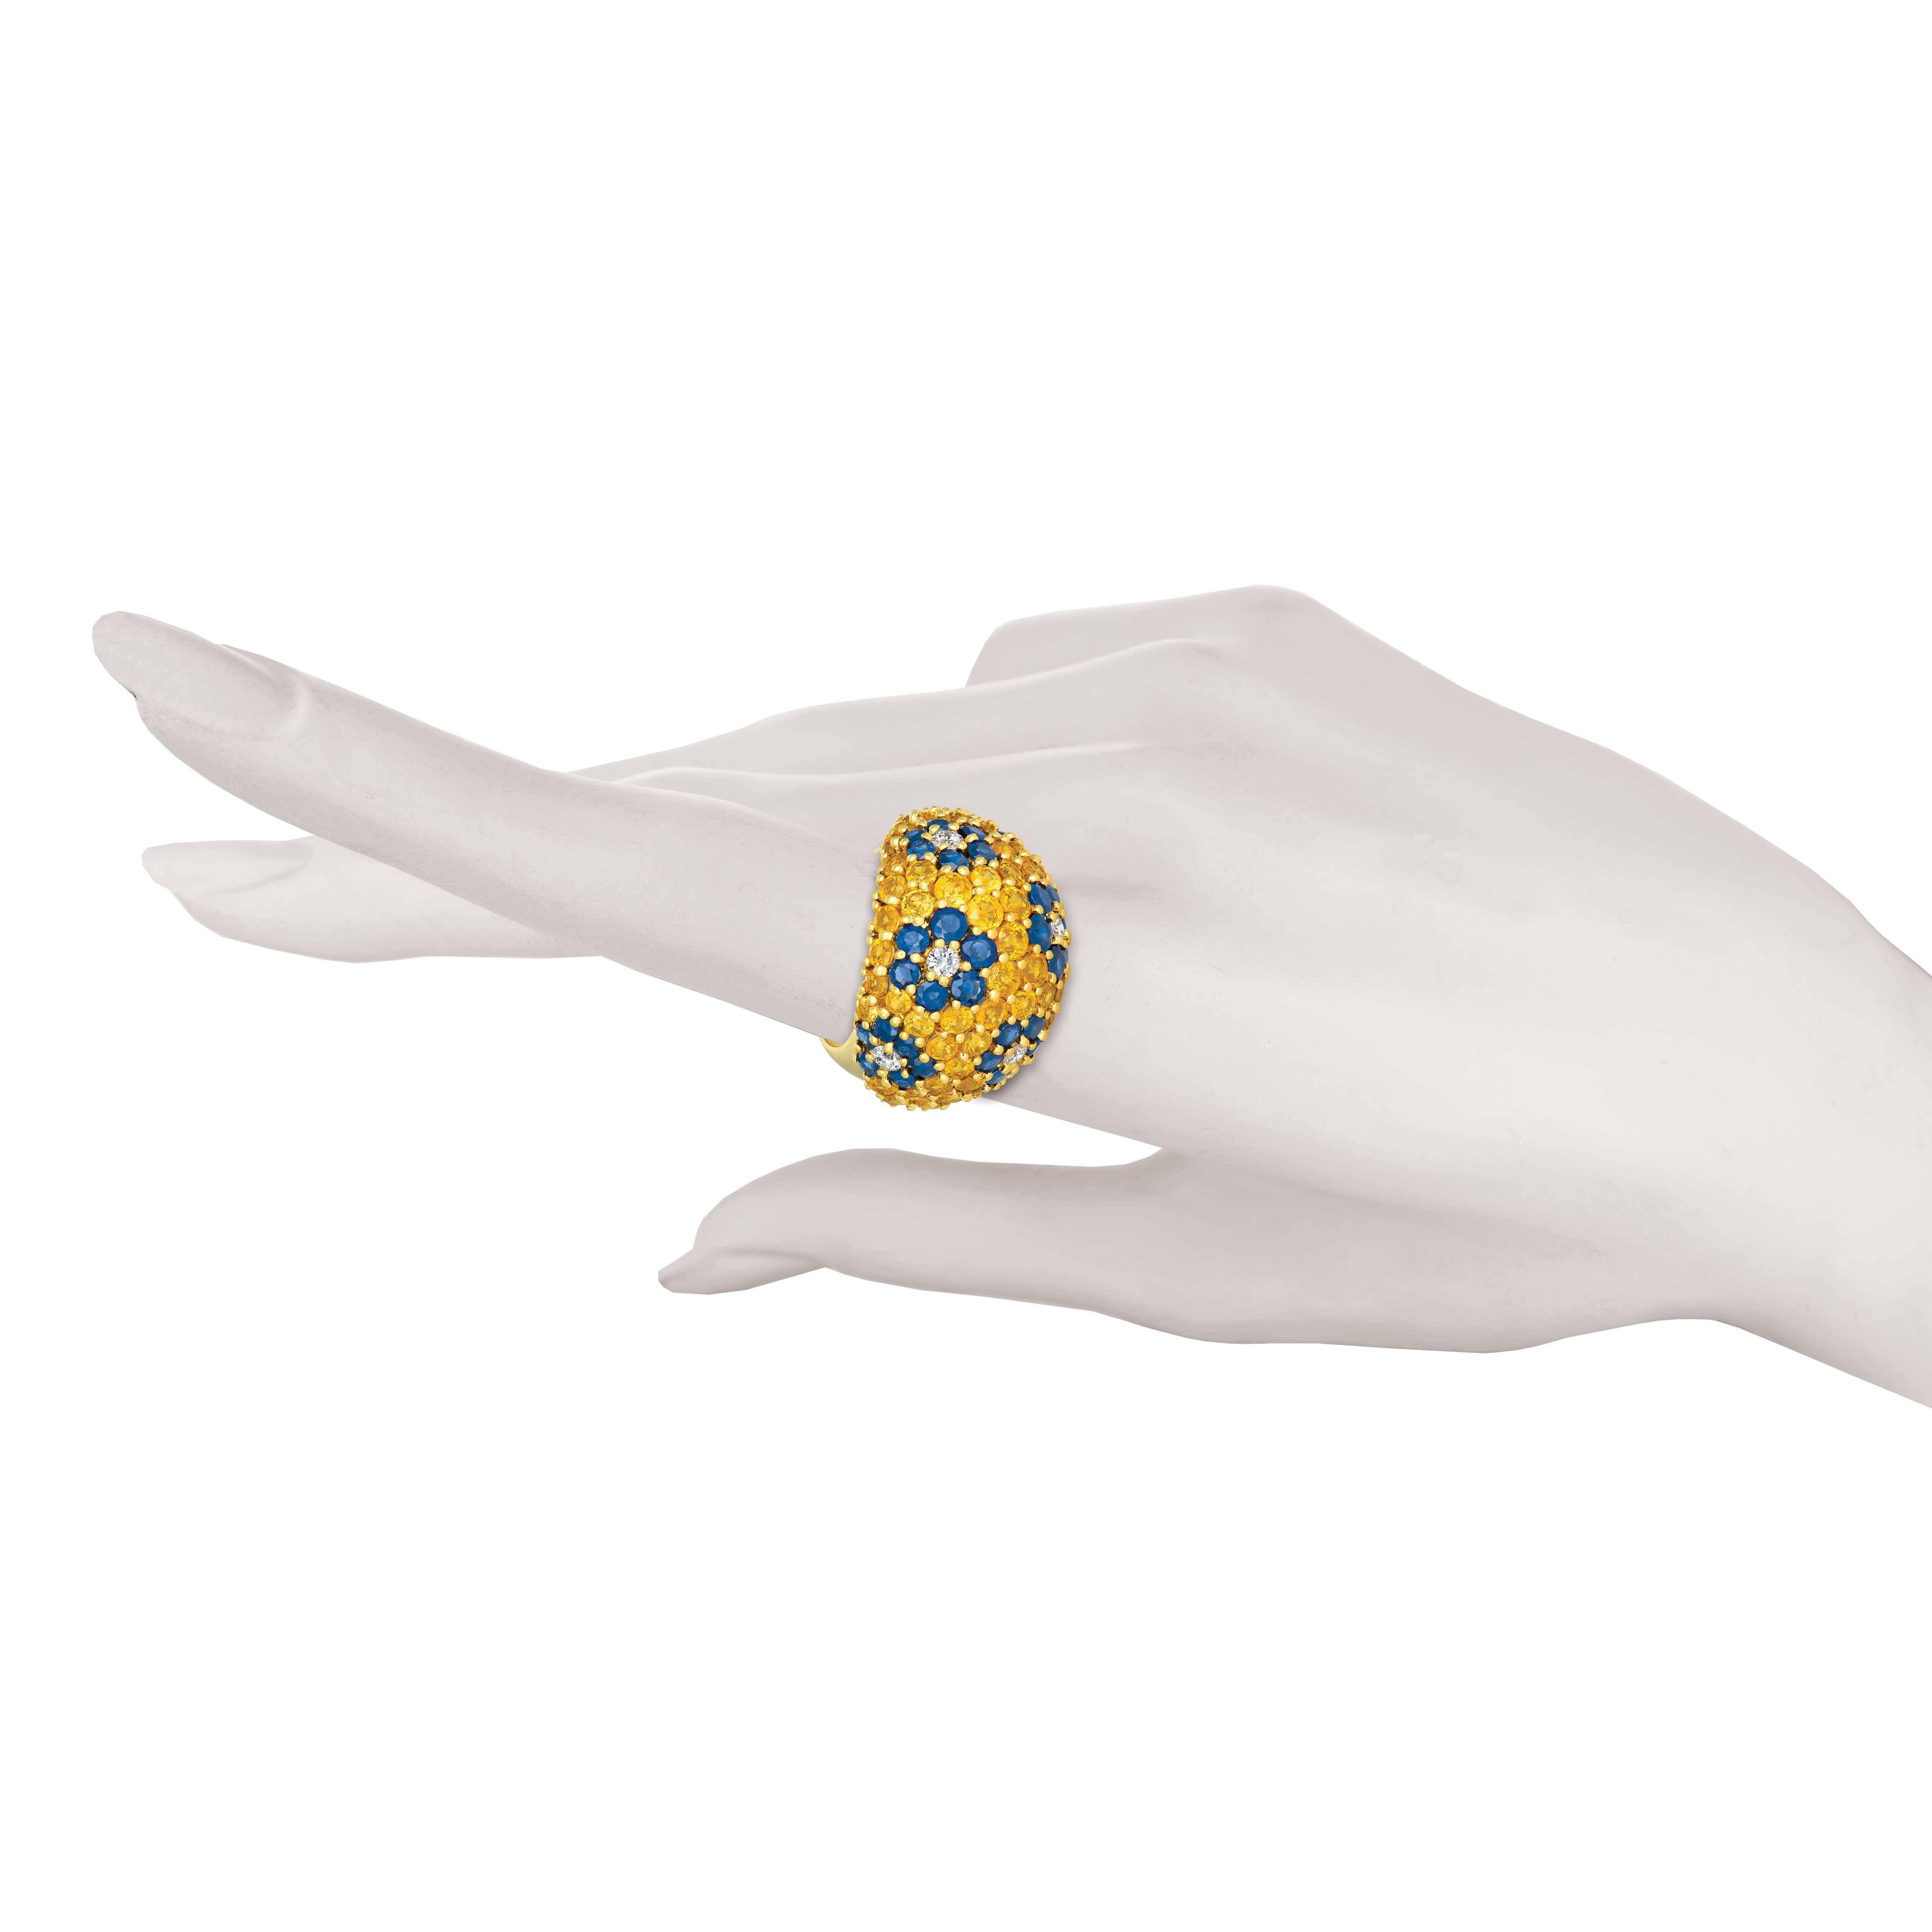 This Jean Vitau dome ring combines the perfect proportions with the wonderful texture of prong set gemstones. The yellow sapphires, weighing 6.75 carats, are a perfect background for the blue sapphires, weighing 4.50 carats, in the floral pattern.